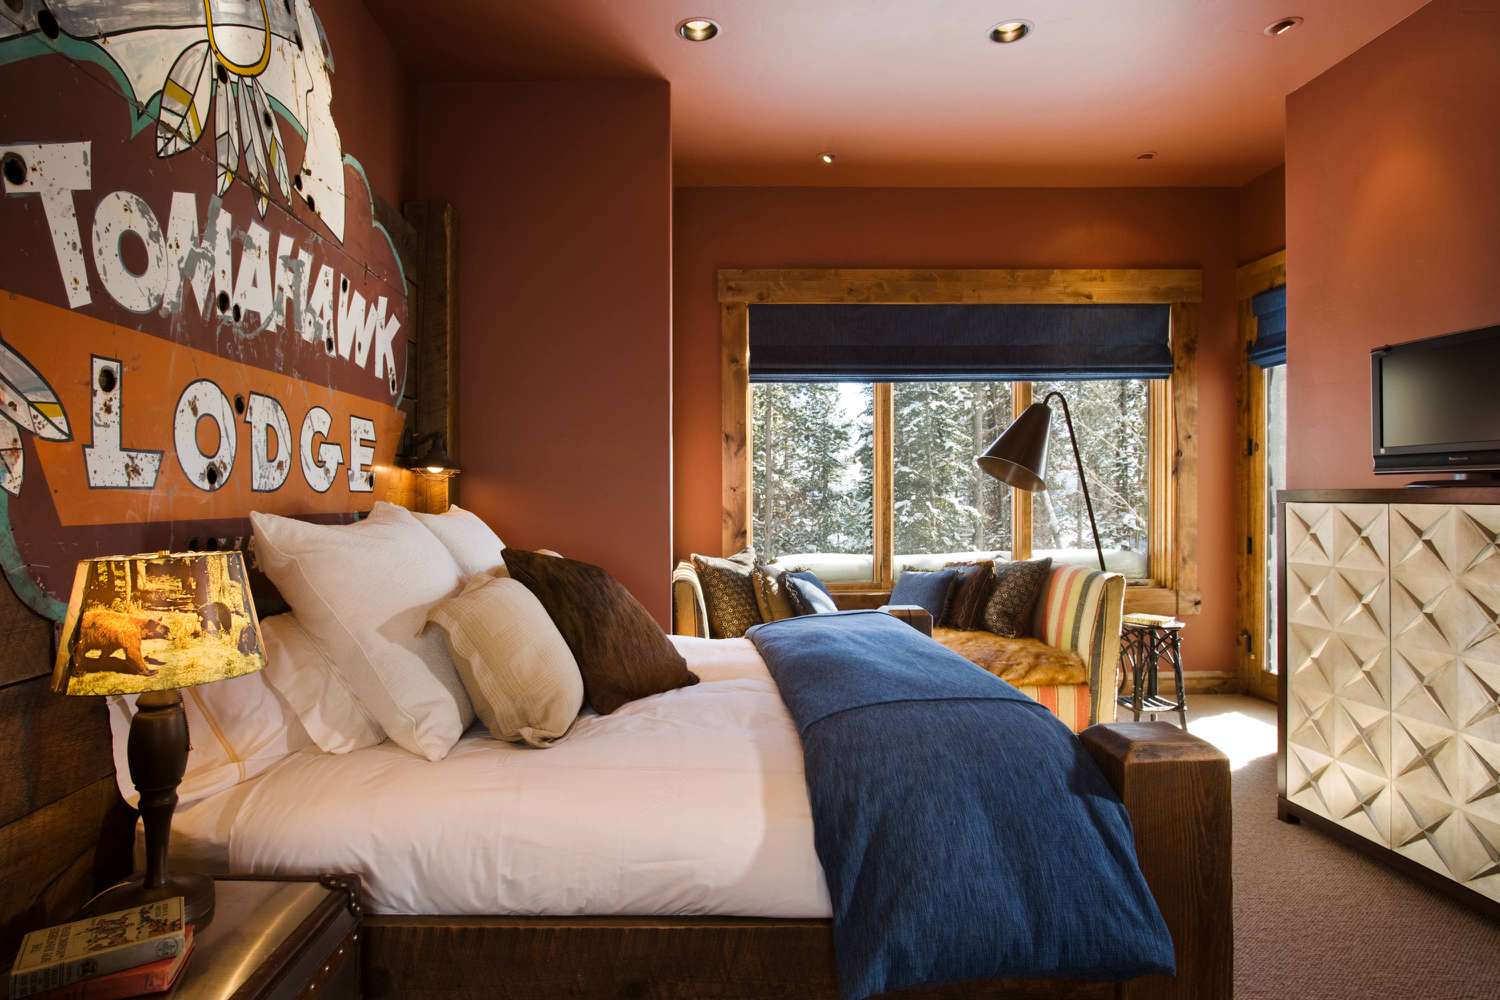 Campy rustic bedroom with vintage motel sign